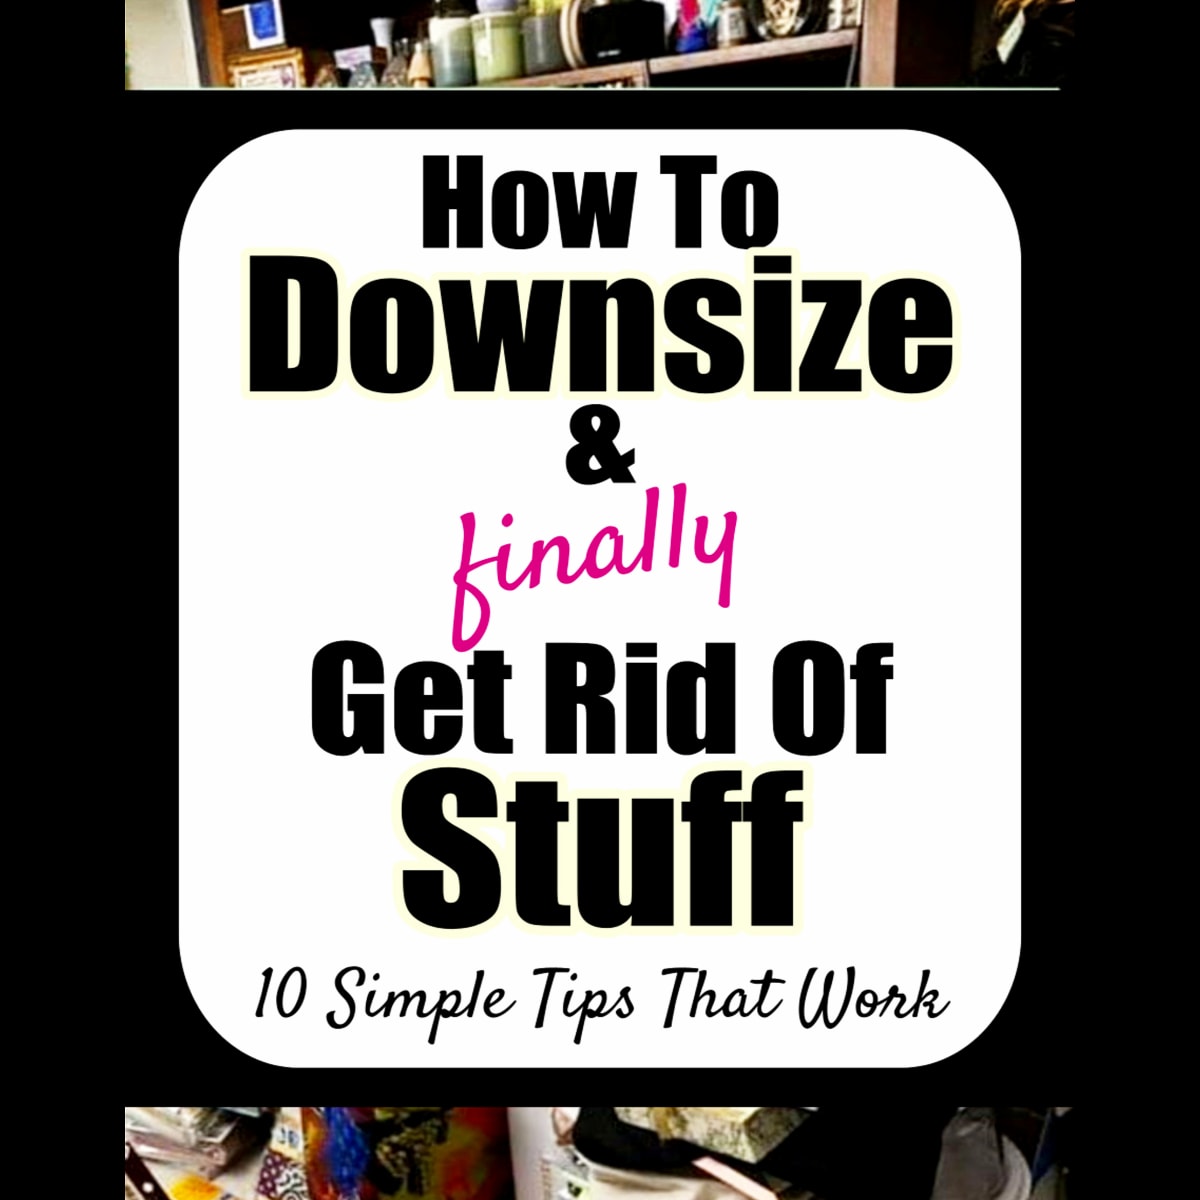 How to downsize your life and finally get rid of STUFF - want to simplify your life? Downsizing your home is overwhelming, here are 10 tips that really helped ME simplify life and get rid of stuff for good.